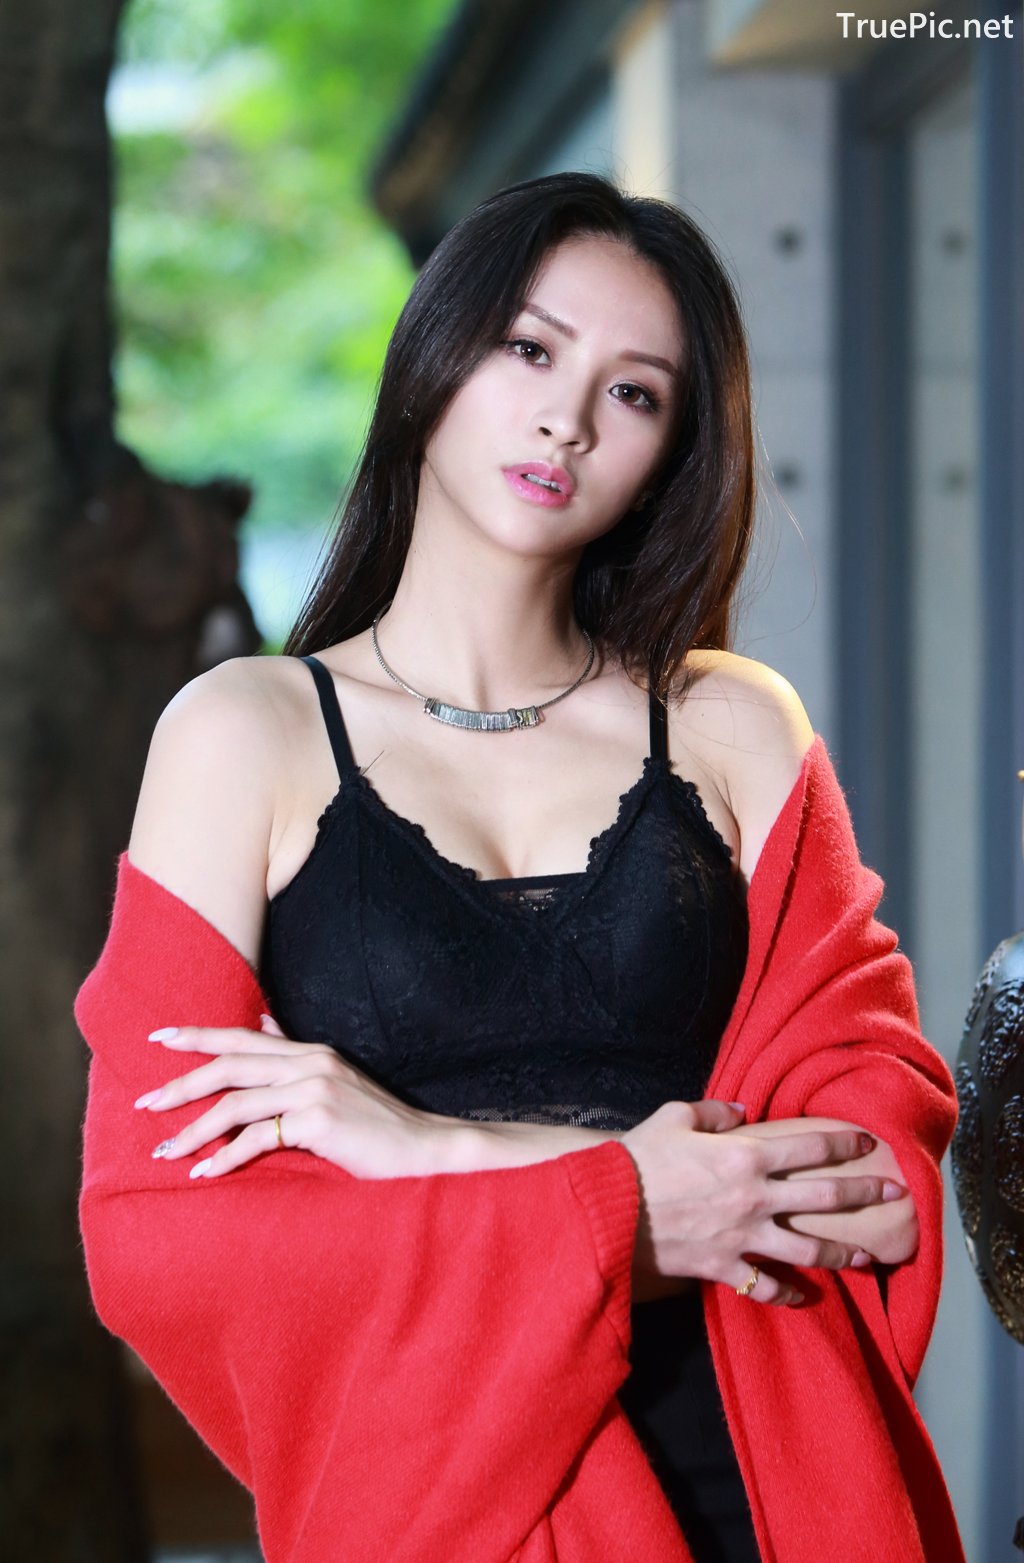 Image-Taiwanese-Beautiful-Long-Legs-Girl-雪岑Lola-Black-Sexy-Short-Pants-and-Crop-Top-Outfit-TruePic.net- Picture-51